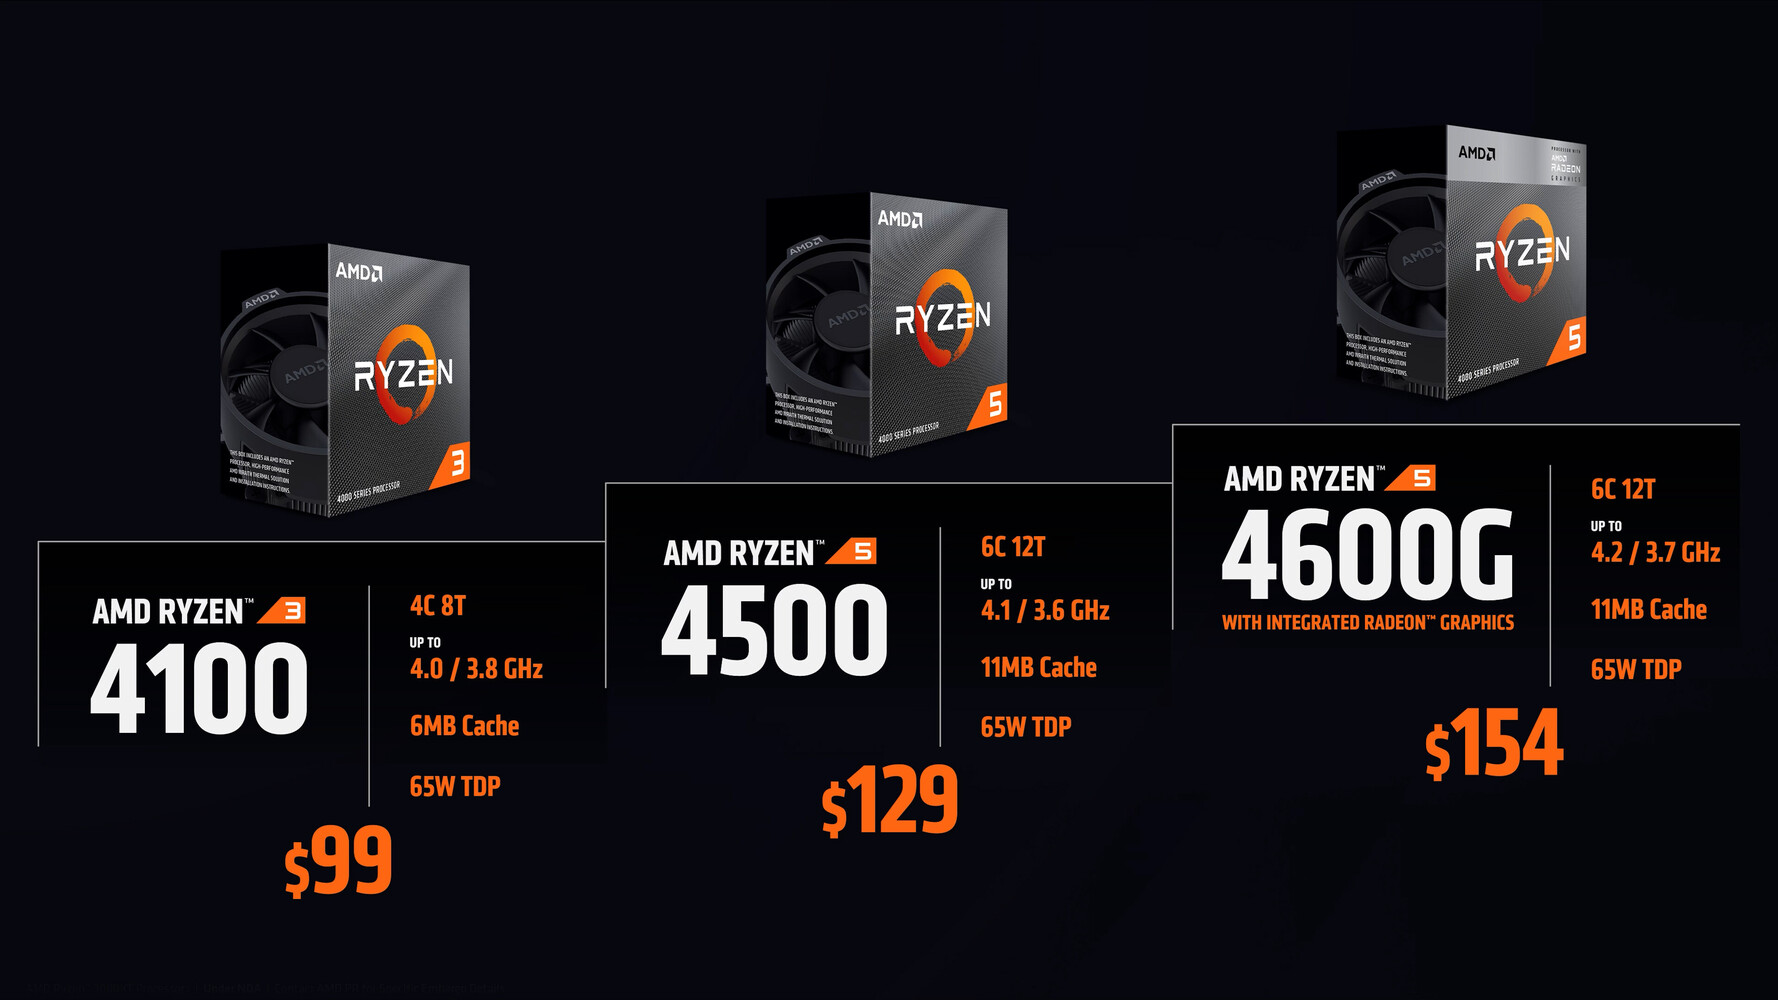 New leak confirms that the i5-12400F is a beast - Overclocking.com